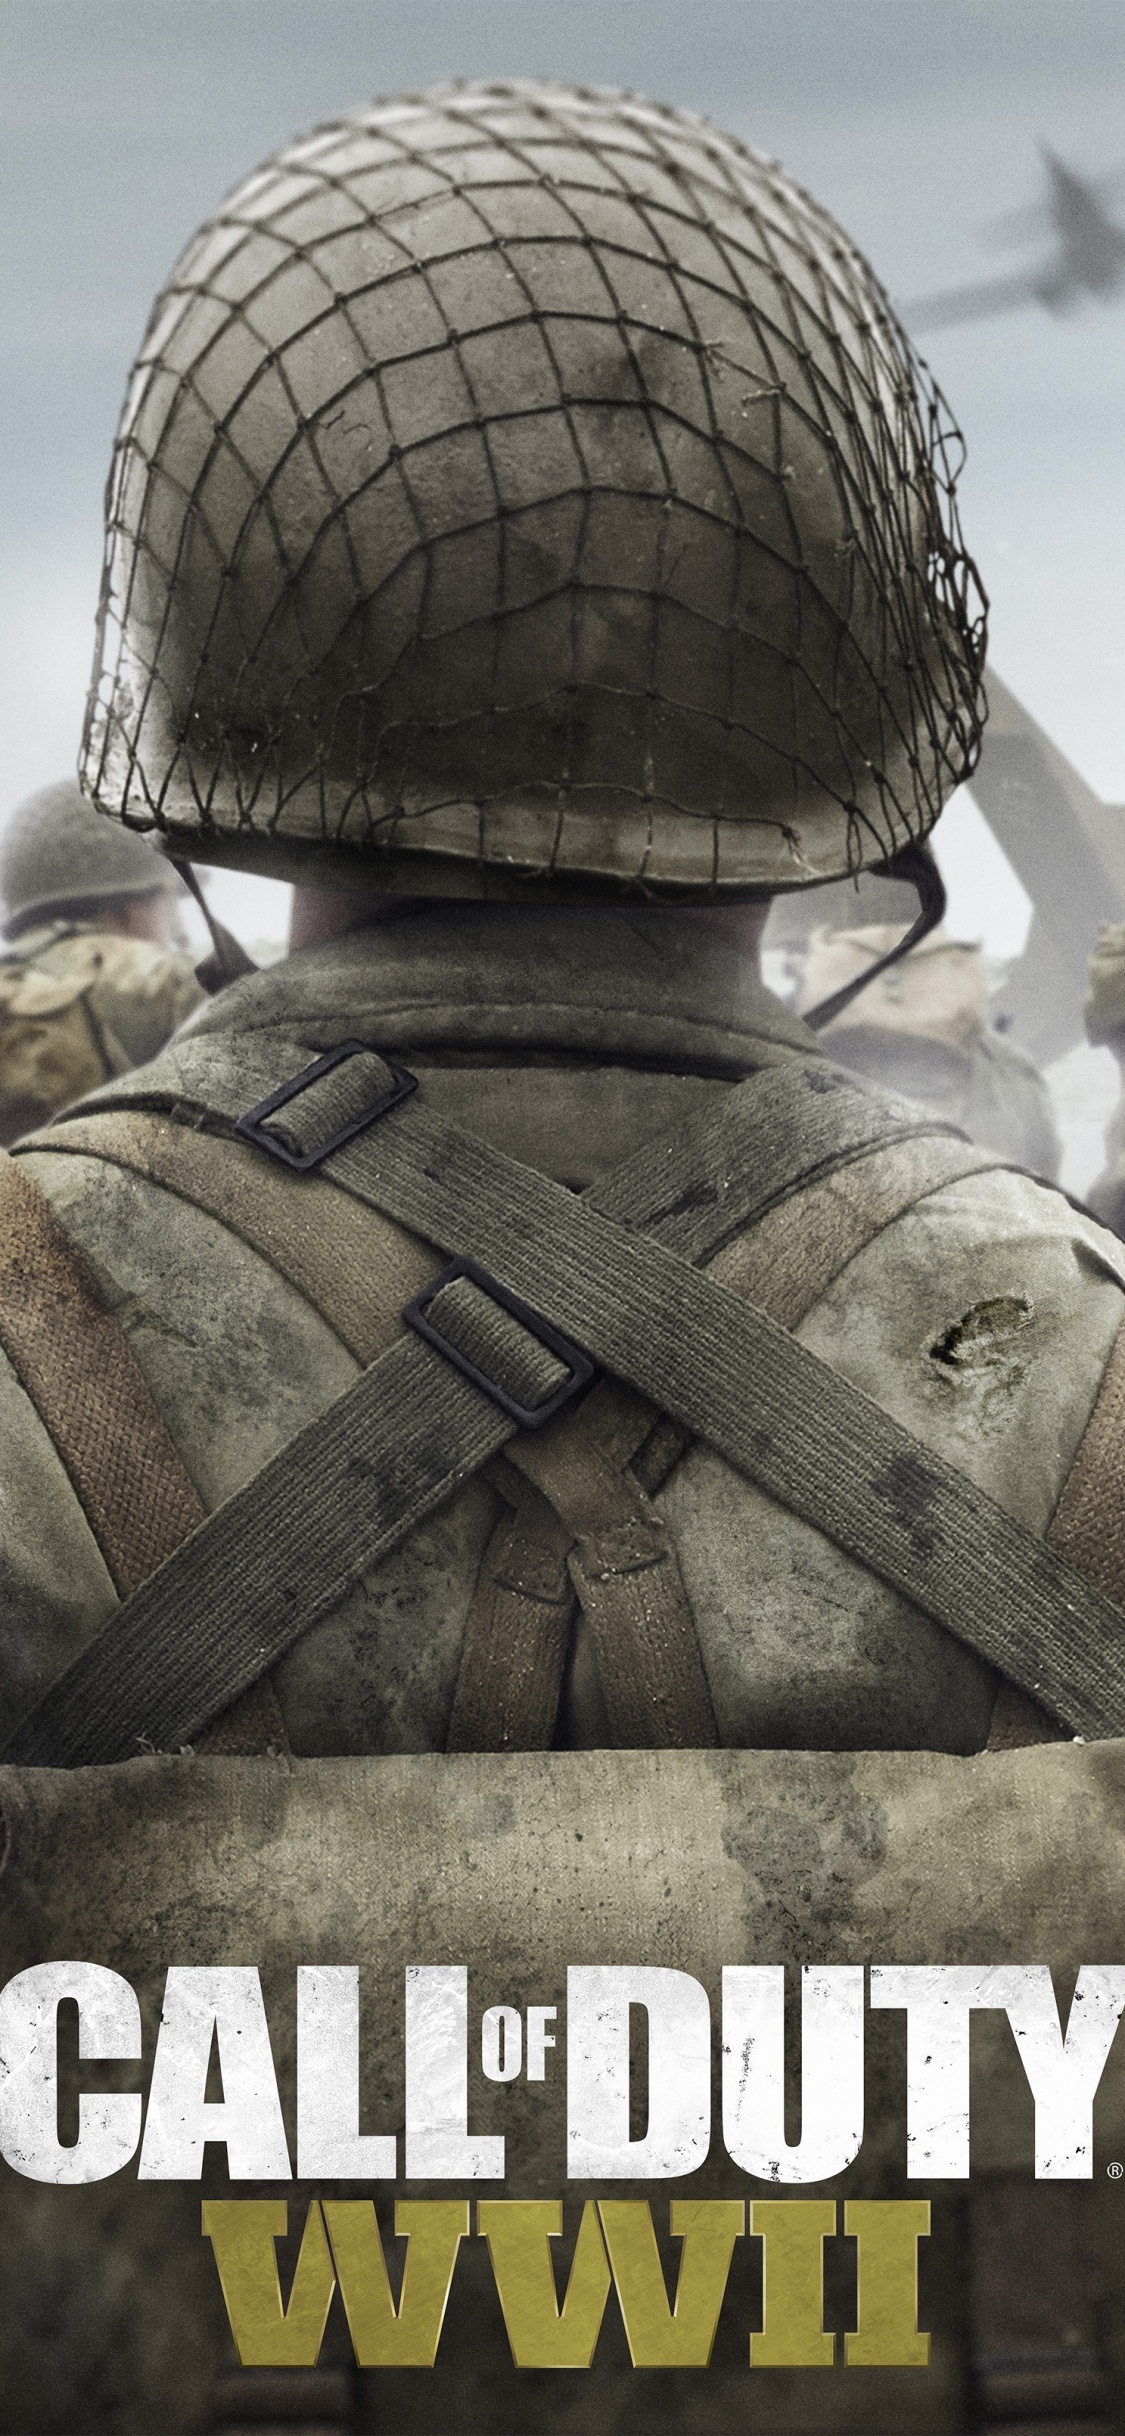 Call of Duty Ww2, Call of Duty WWII, Activision, Sledgehammer Games, Soldier. Wallpaper in 1125x2436 Resolution